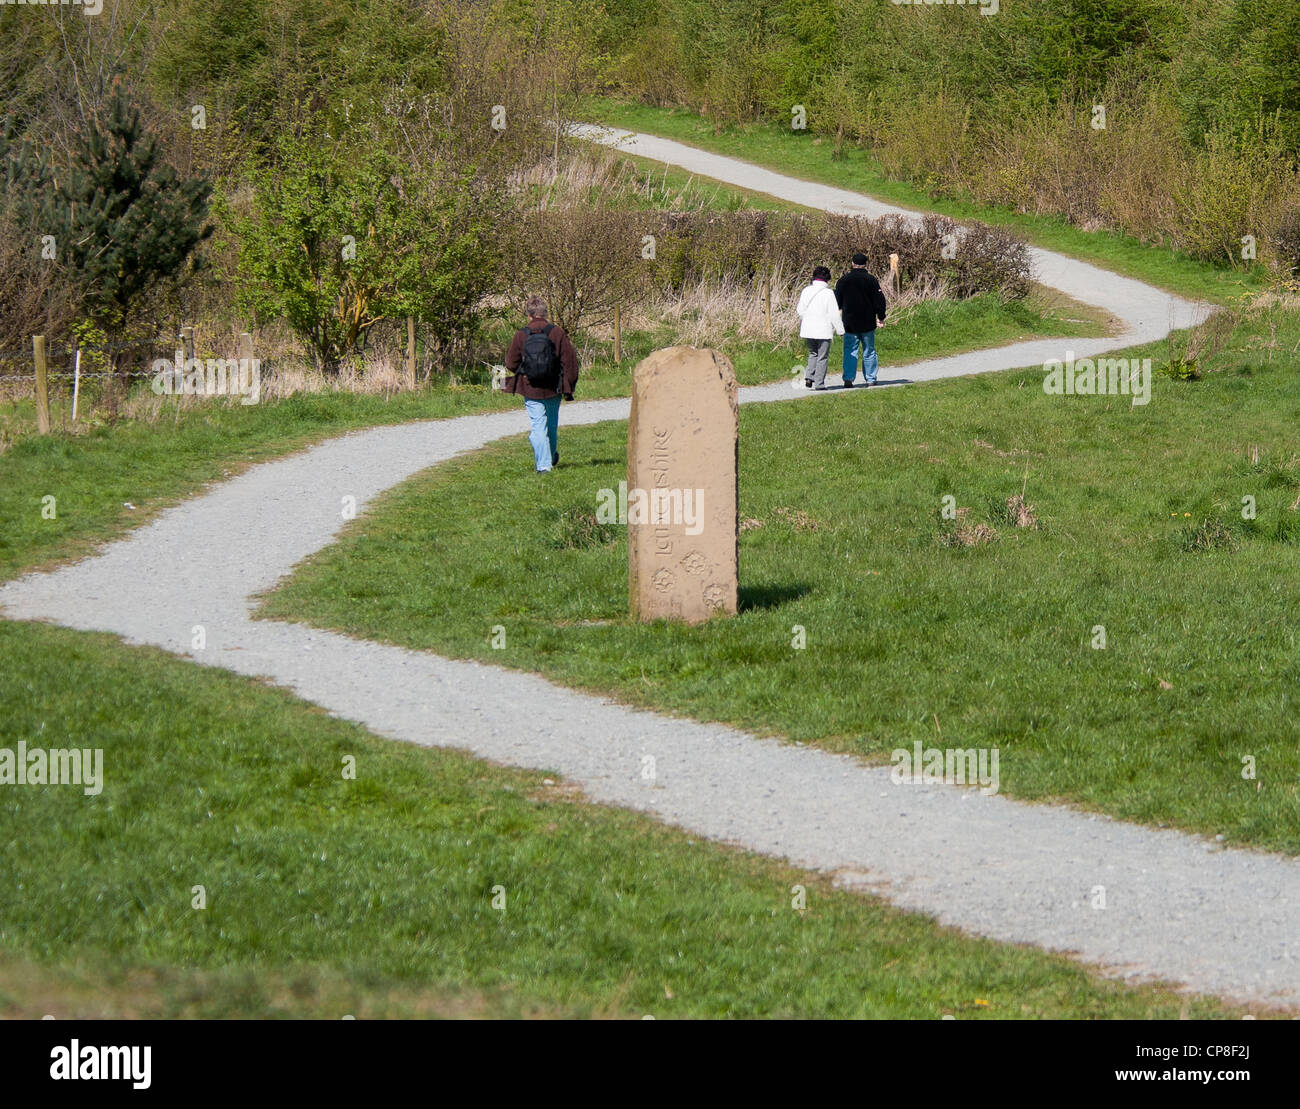 Walkers on pathway on Old Pale hill, Delamere Forest, Cheshire, with stone viewpoint marker Stock Photo